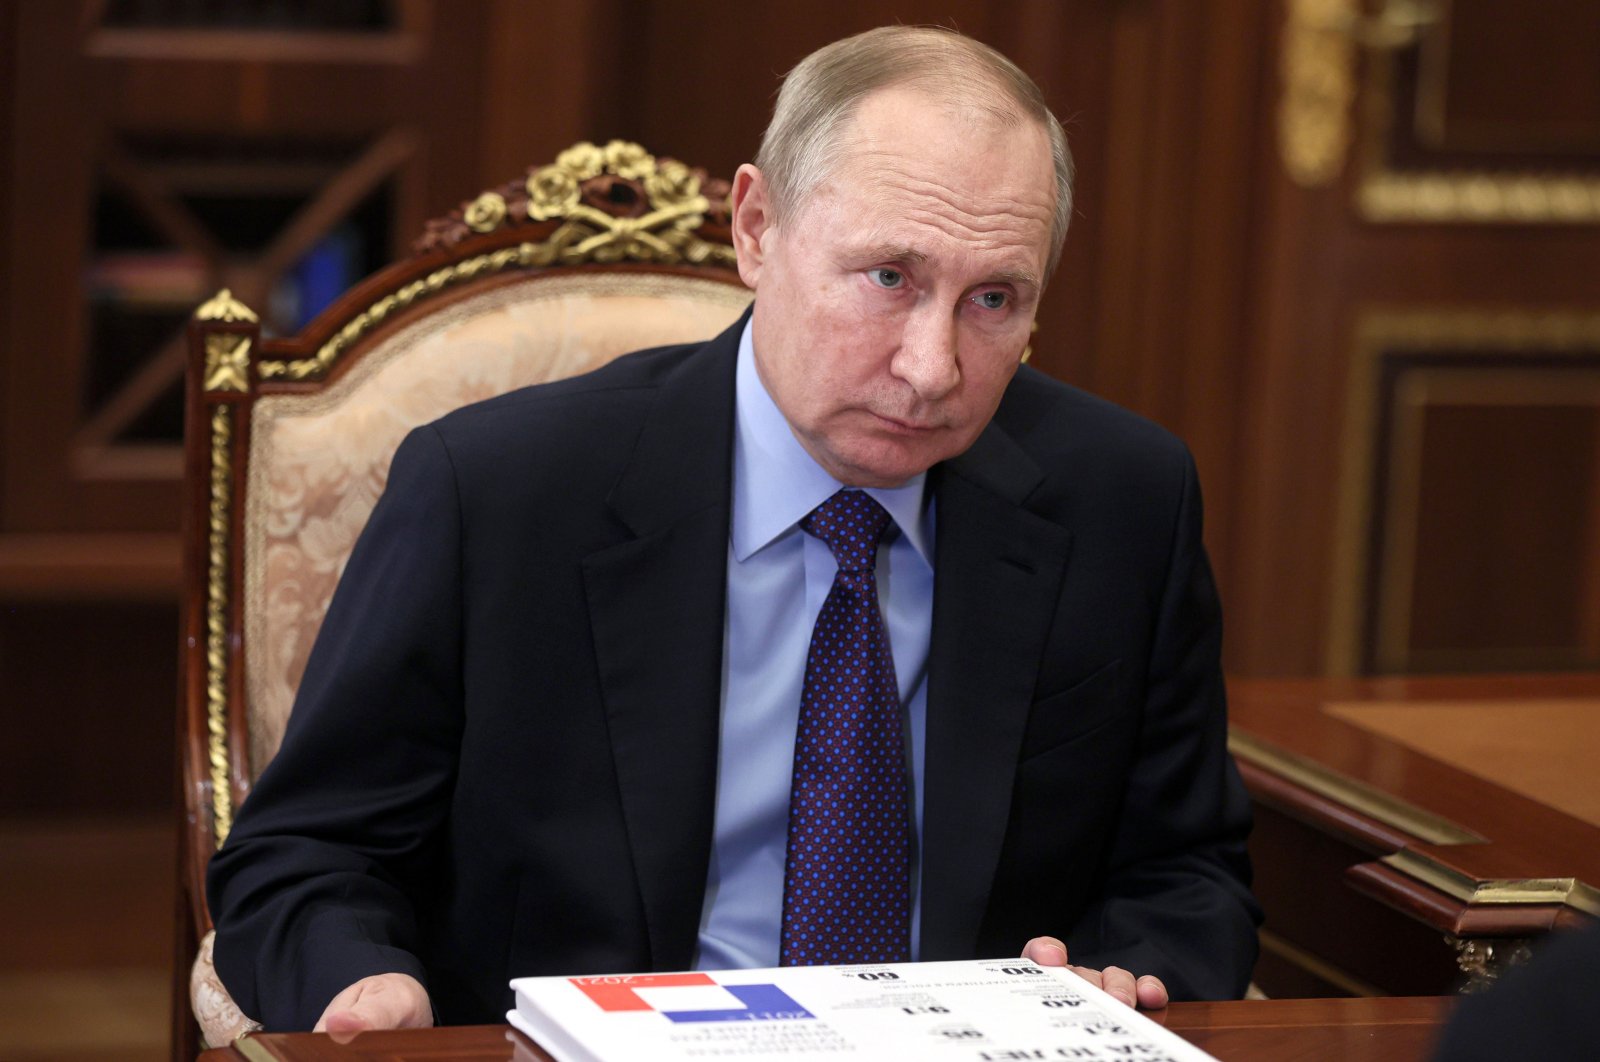 Russian President Vladimir Putin listens during a meeting in Moscow, Russia, Dec. 30, 2021. (AP Photo)